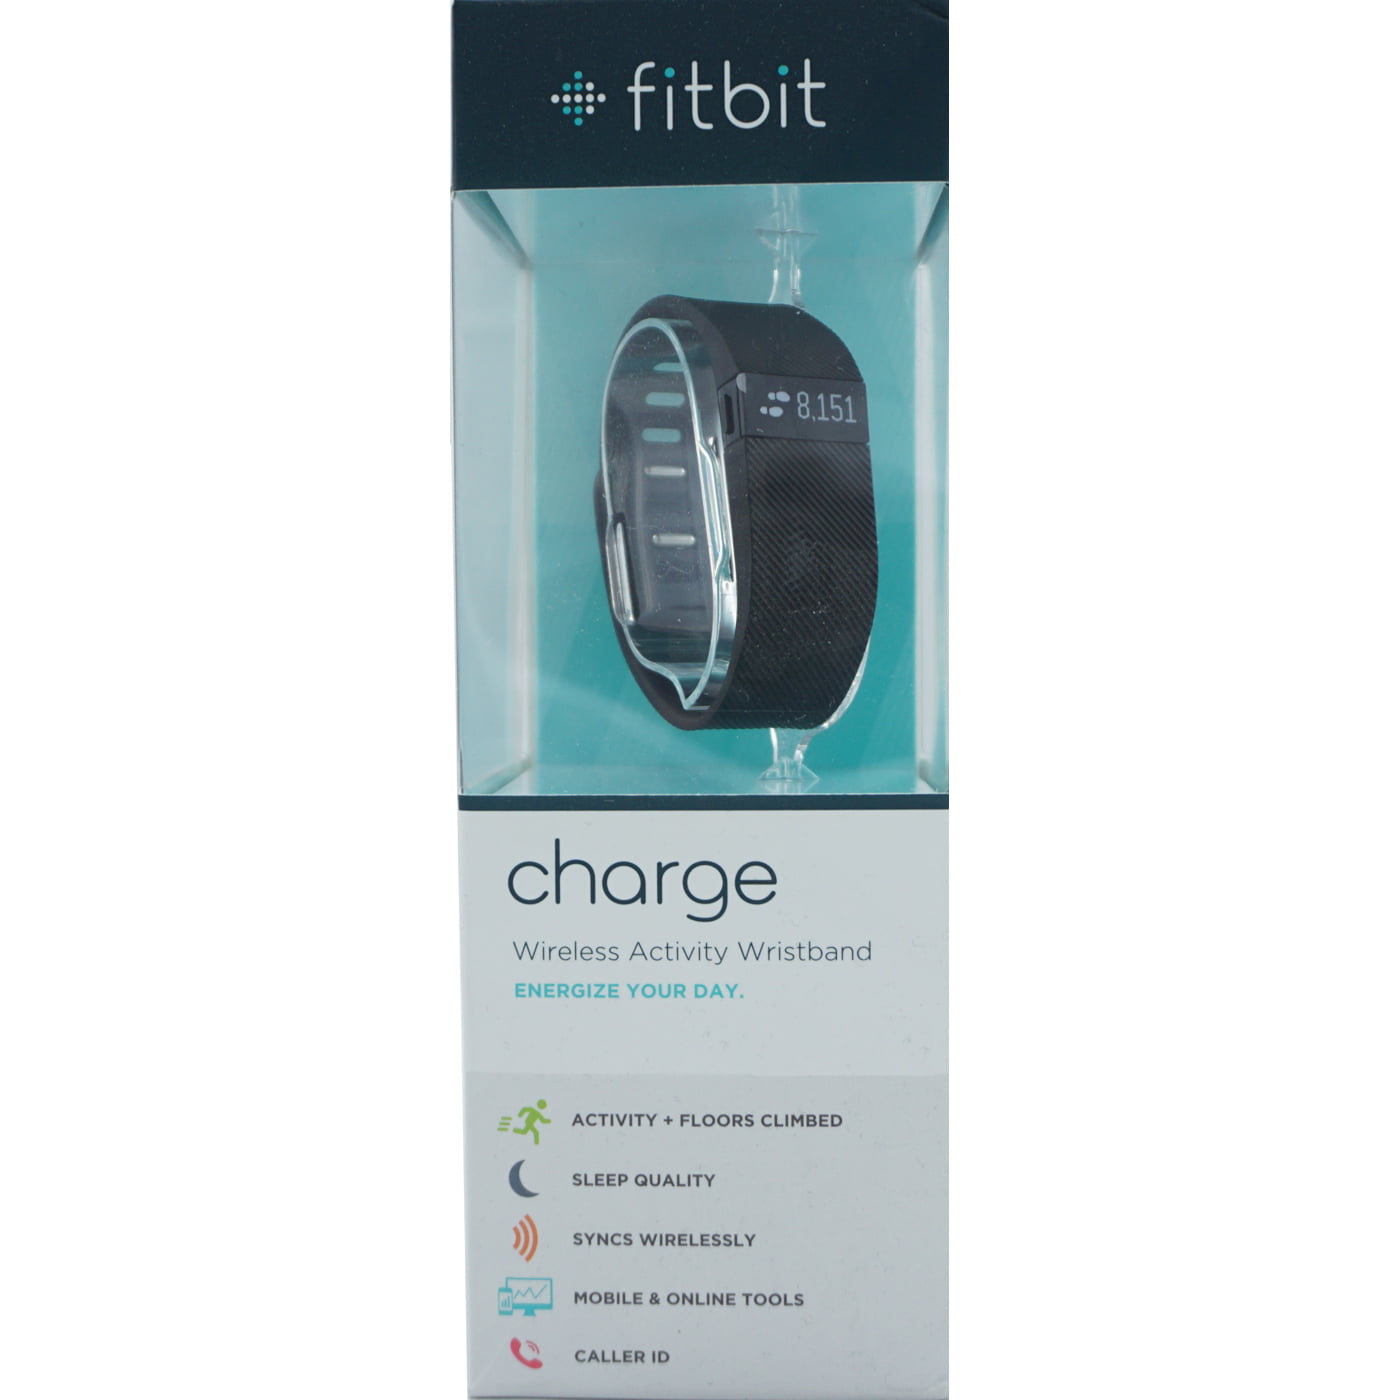 Large Black FB404BKL Brand New Fitbit Charge Wireless Activity Wristband 